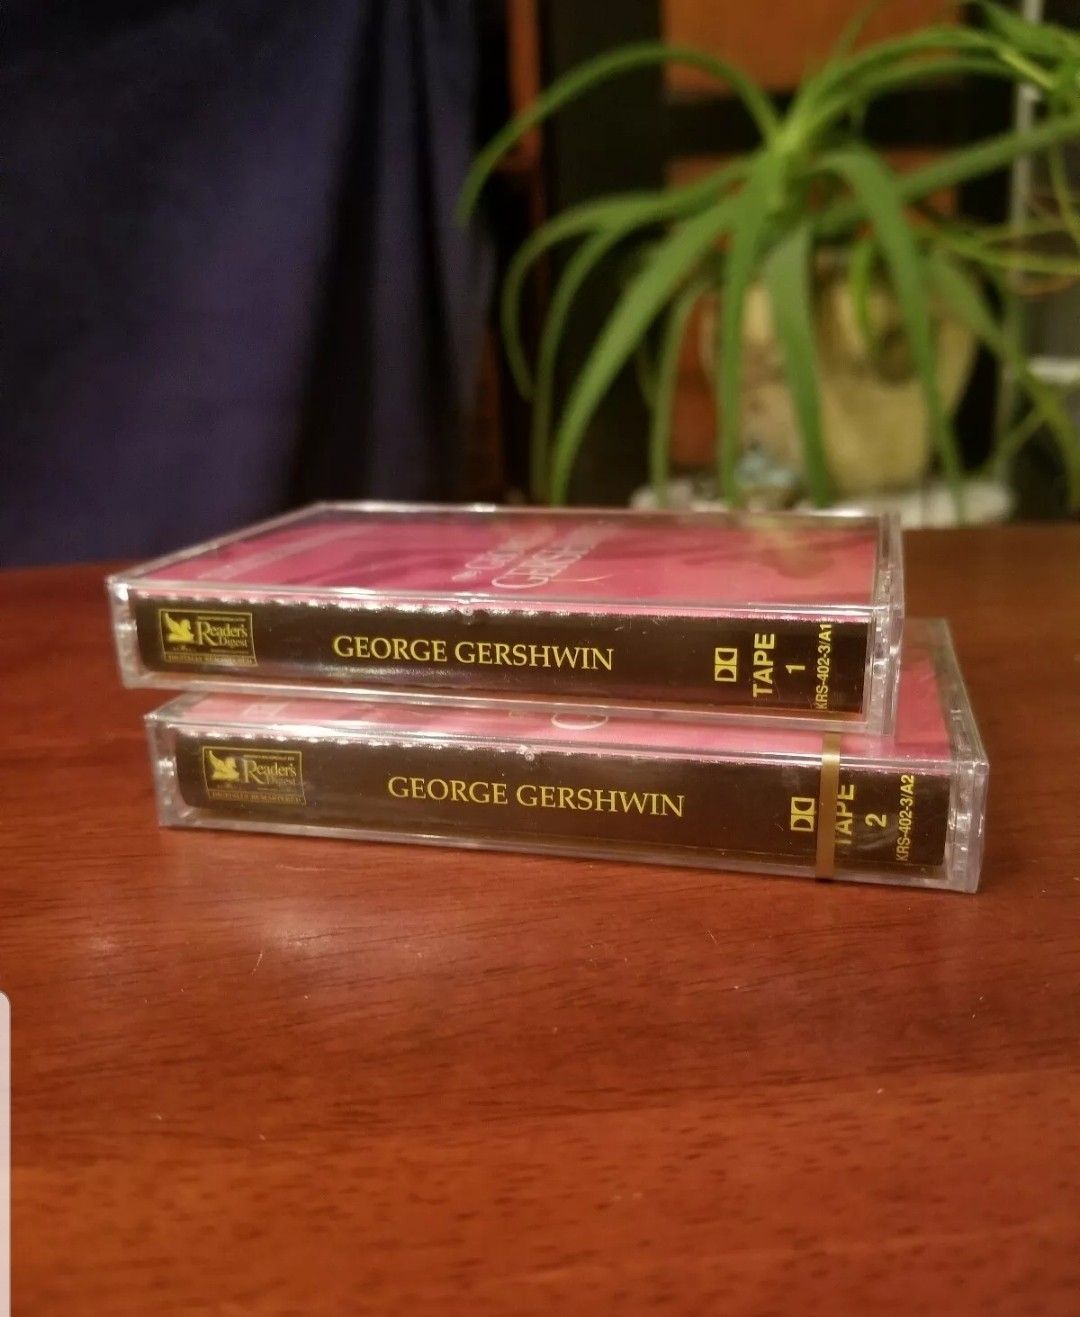 GEORGE GERSHWIN / Favorites From the Classics, Two-Cassette Set (1993)